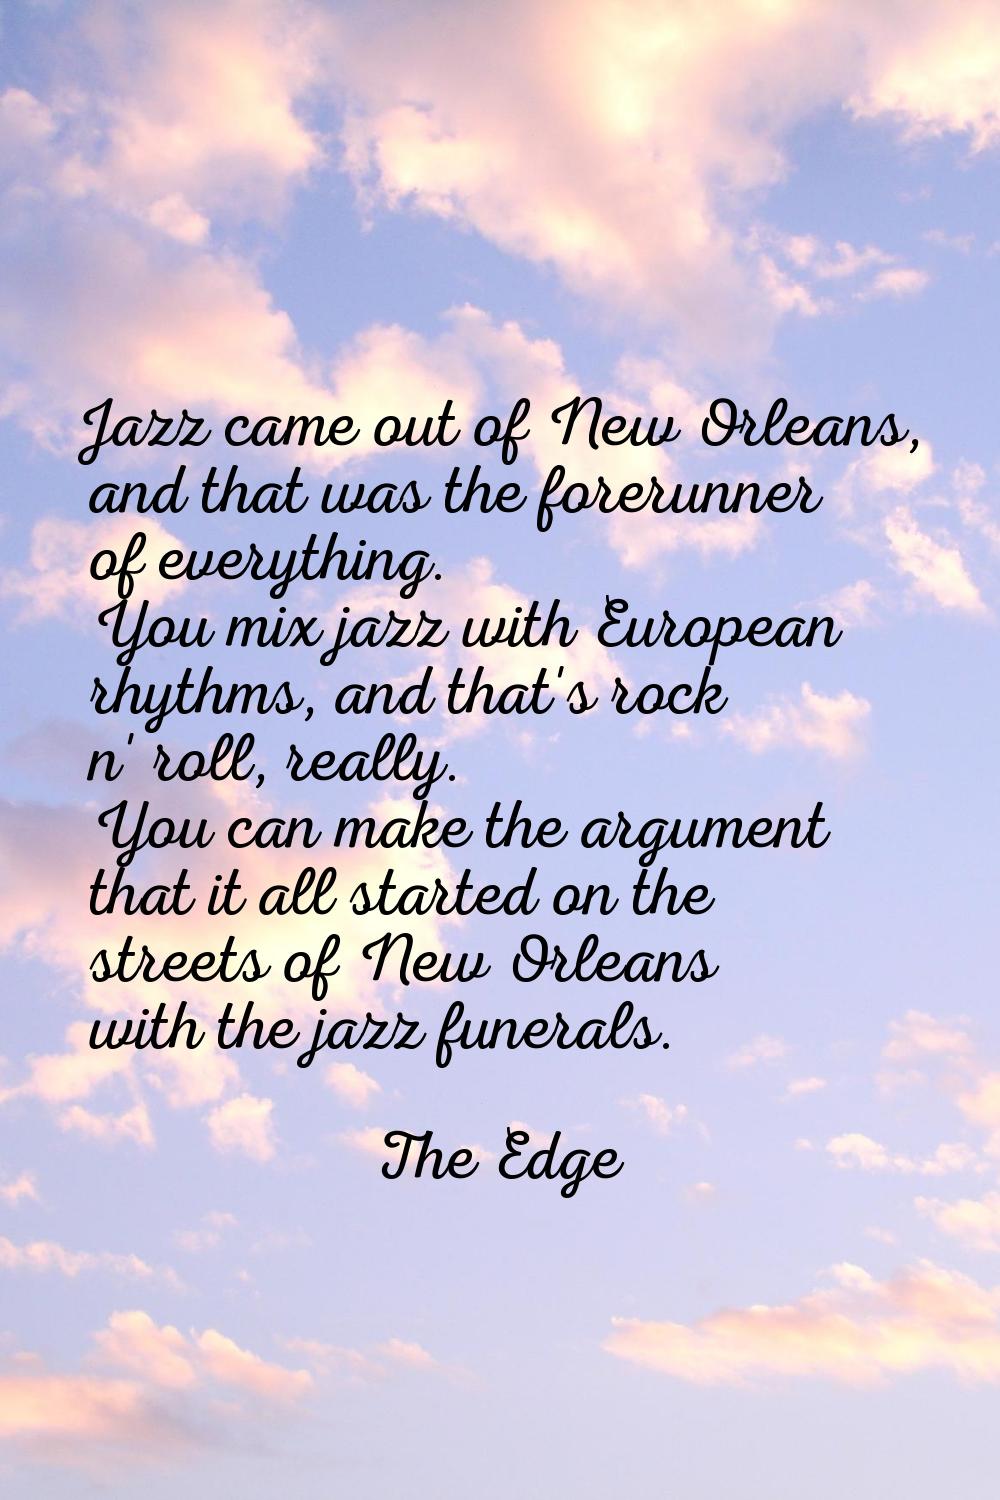 Jazz came out of New Orleans, and that was the forerunner of everything. You mix jazz with European